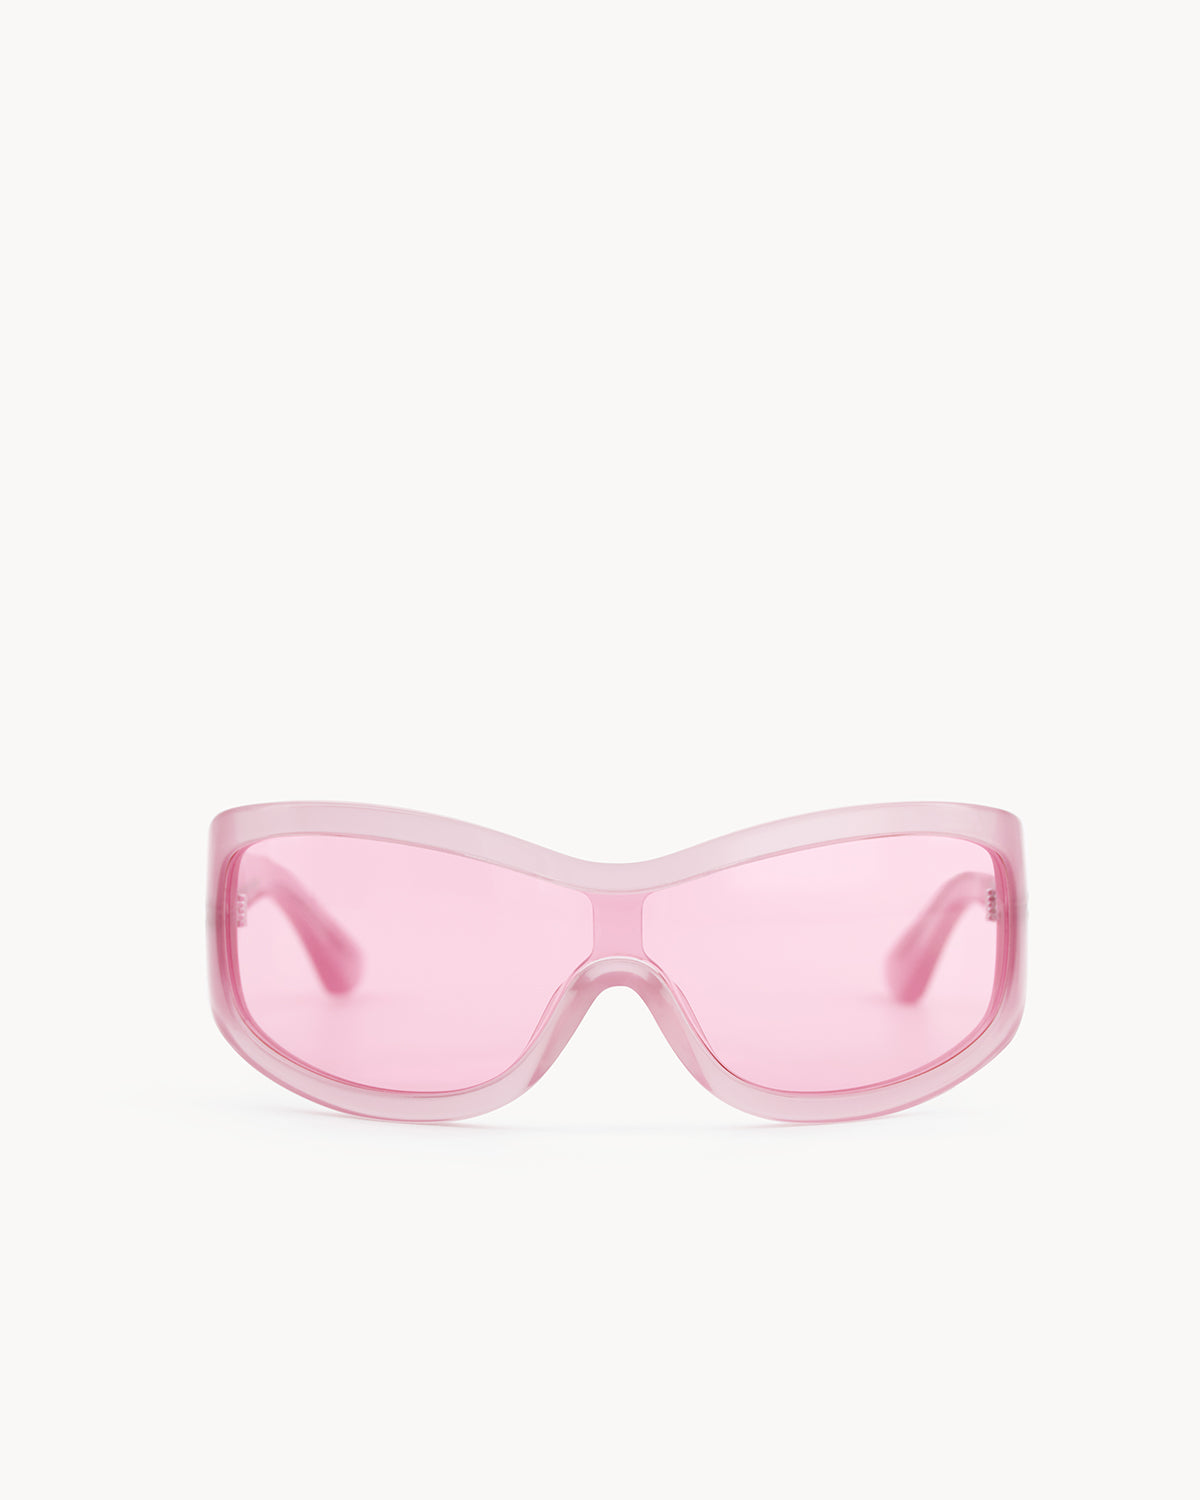 Port Tanger Nunny Sunglasses in Muddy Pink Acetate and Pink Lenses 1